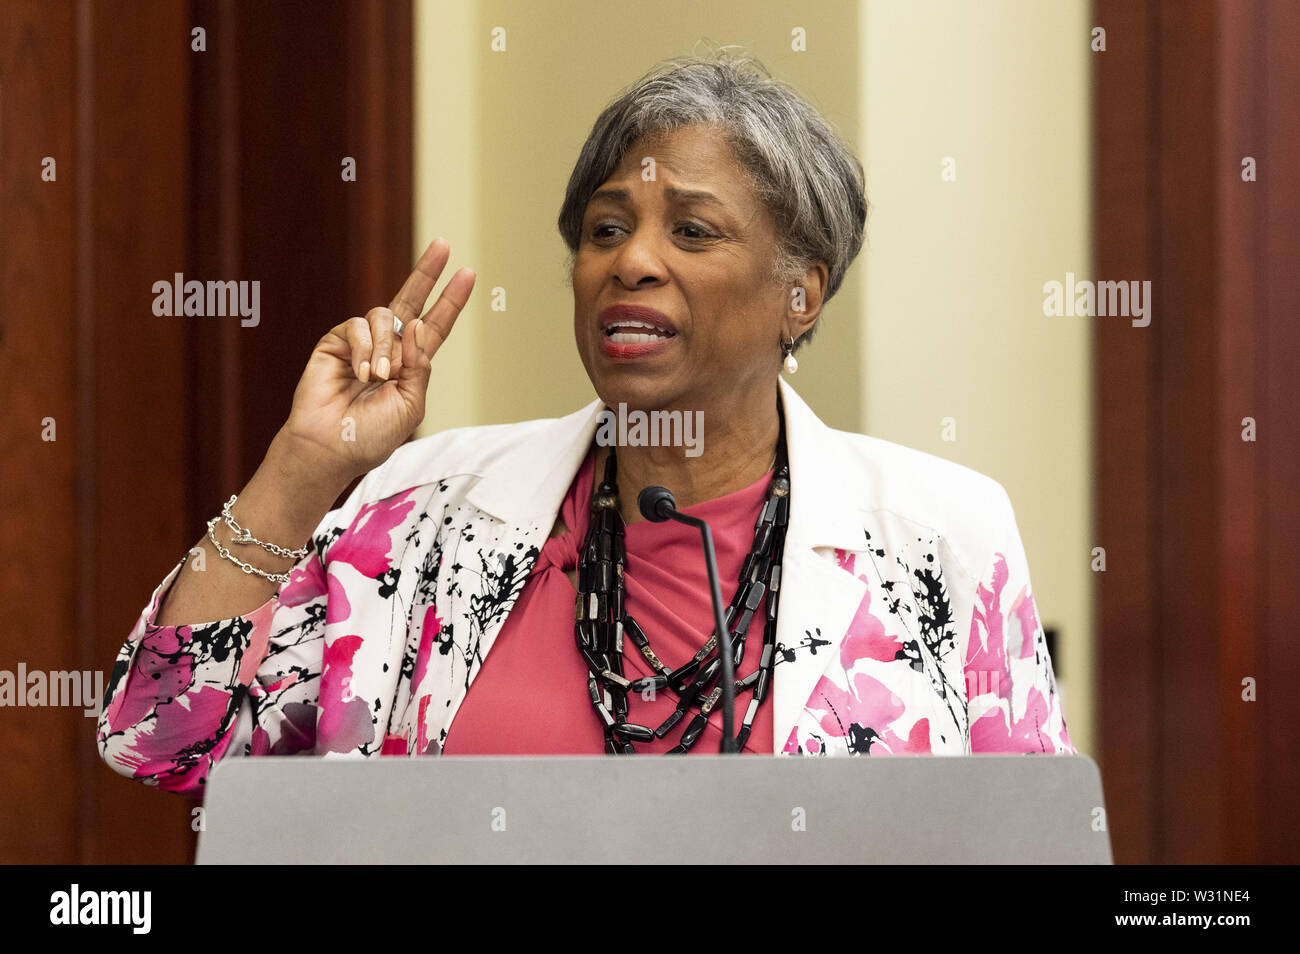 Washington, D.C, USA. 11th July, 2019. U.S. Representative BRENDA LAWRENCE (D-MI) speaking at the Black Maternal Health Caucus Stakeholder Summit at the Capitol in Washington, DC on July 11, 2019. Credit: Michael Brochstein/ZUMA Wire/Alamy Live News Stock Photo